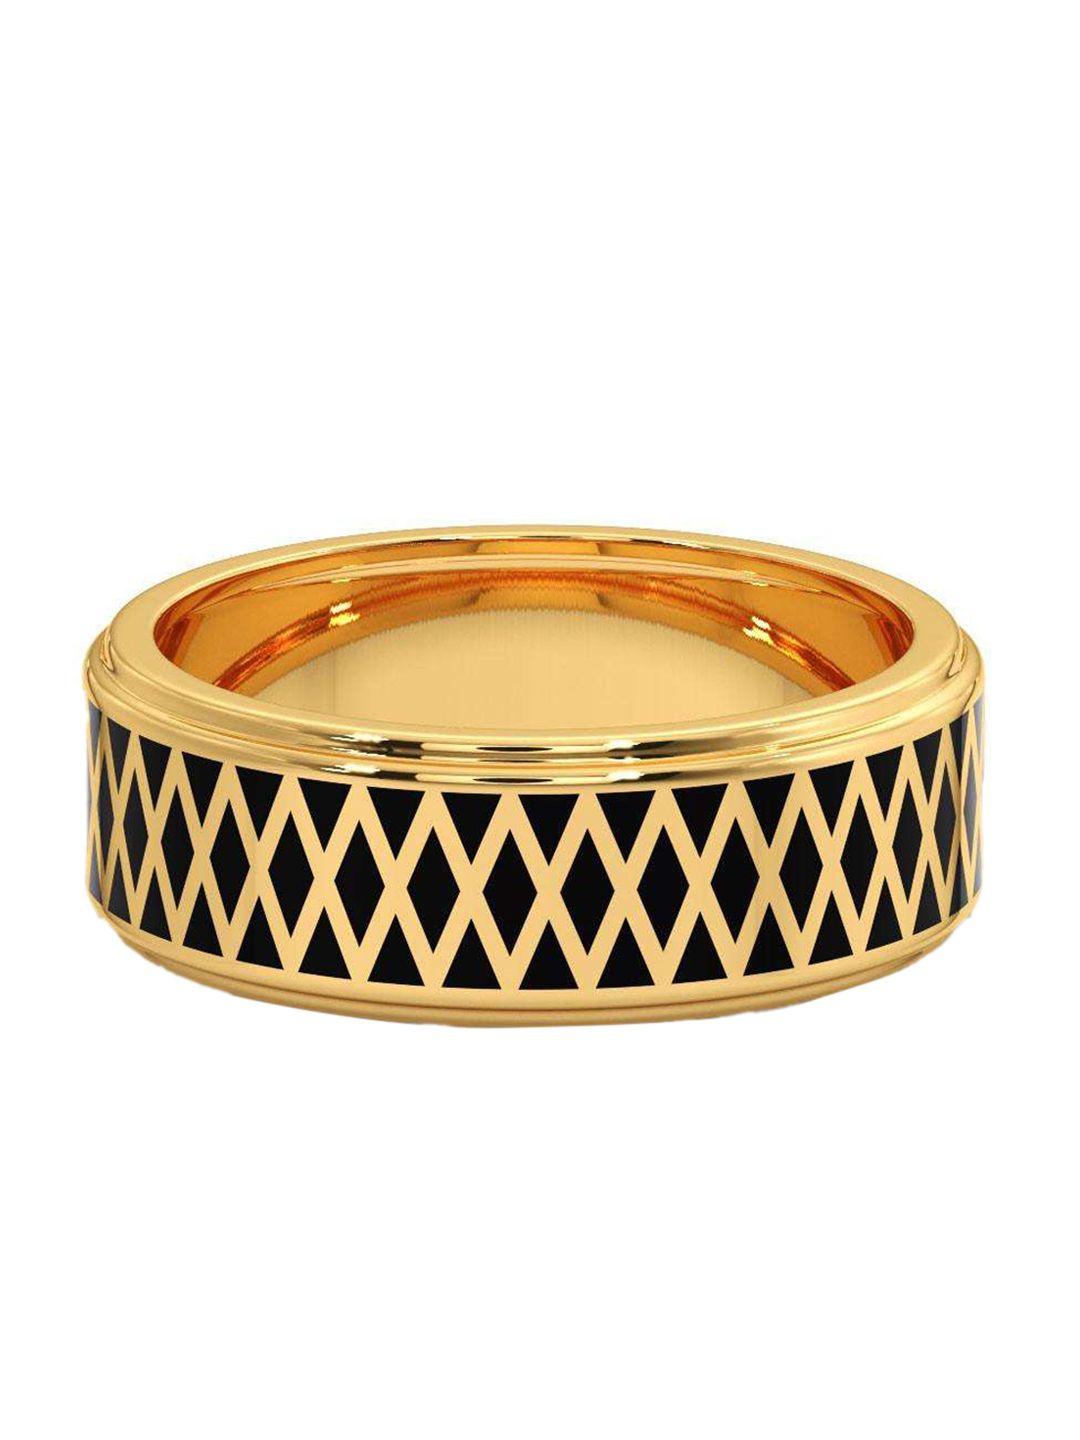 candere-a-kalyan-jewellers-company-men-14kt-gold-ring-3.94gm